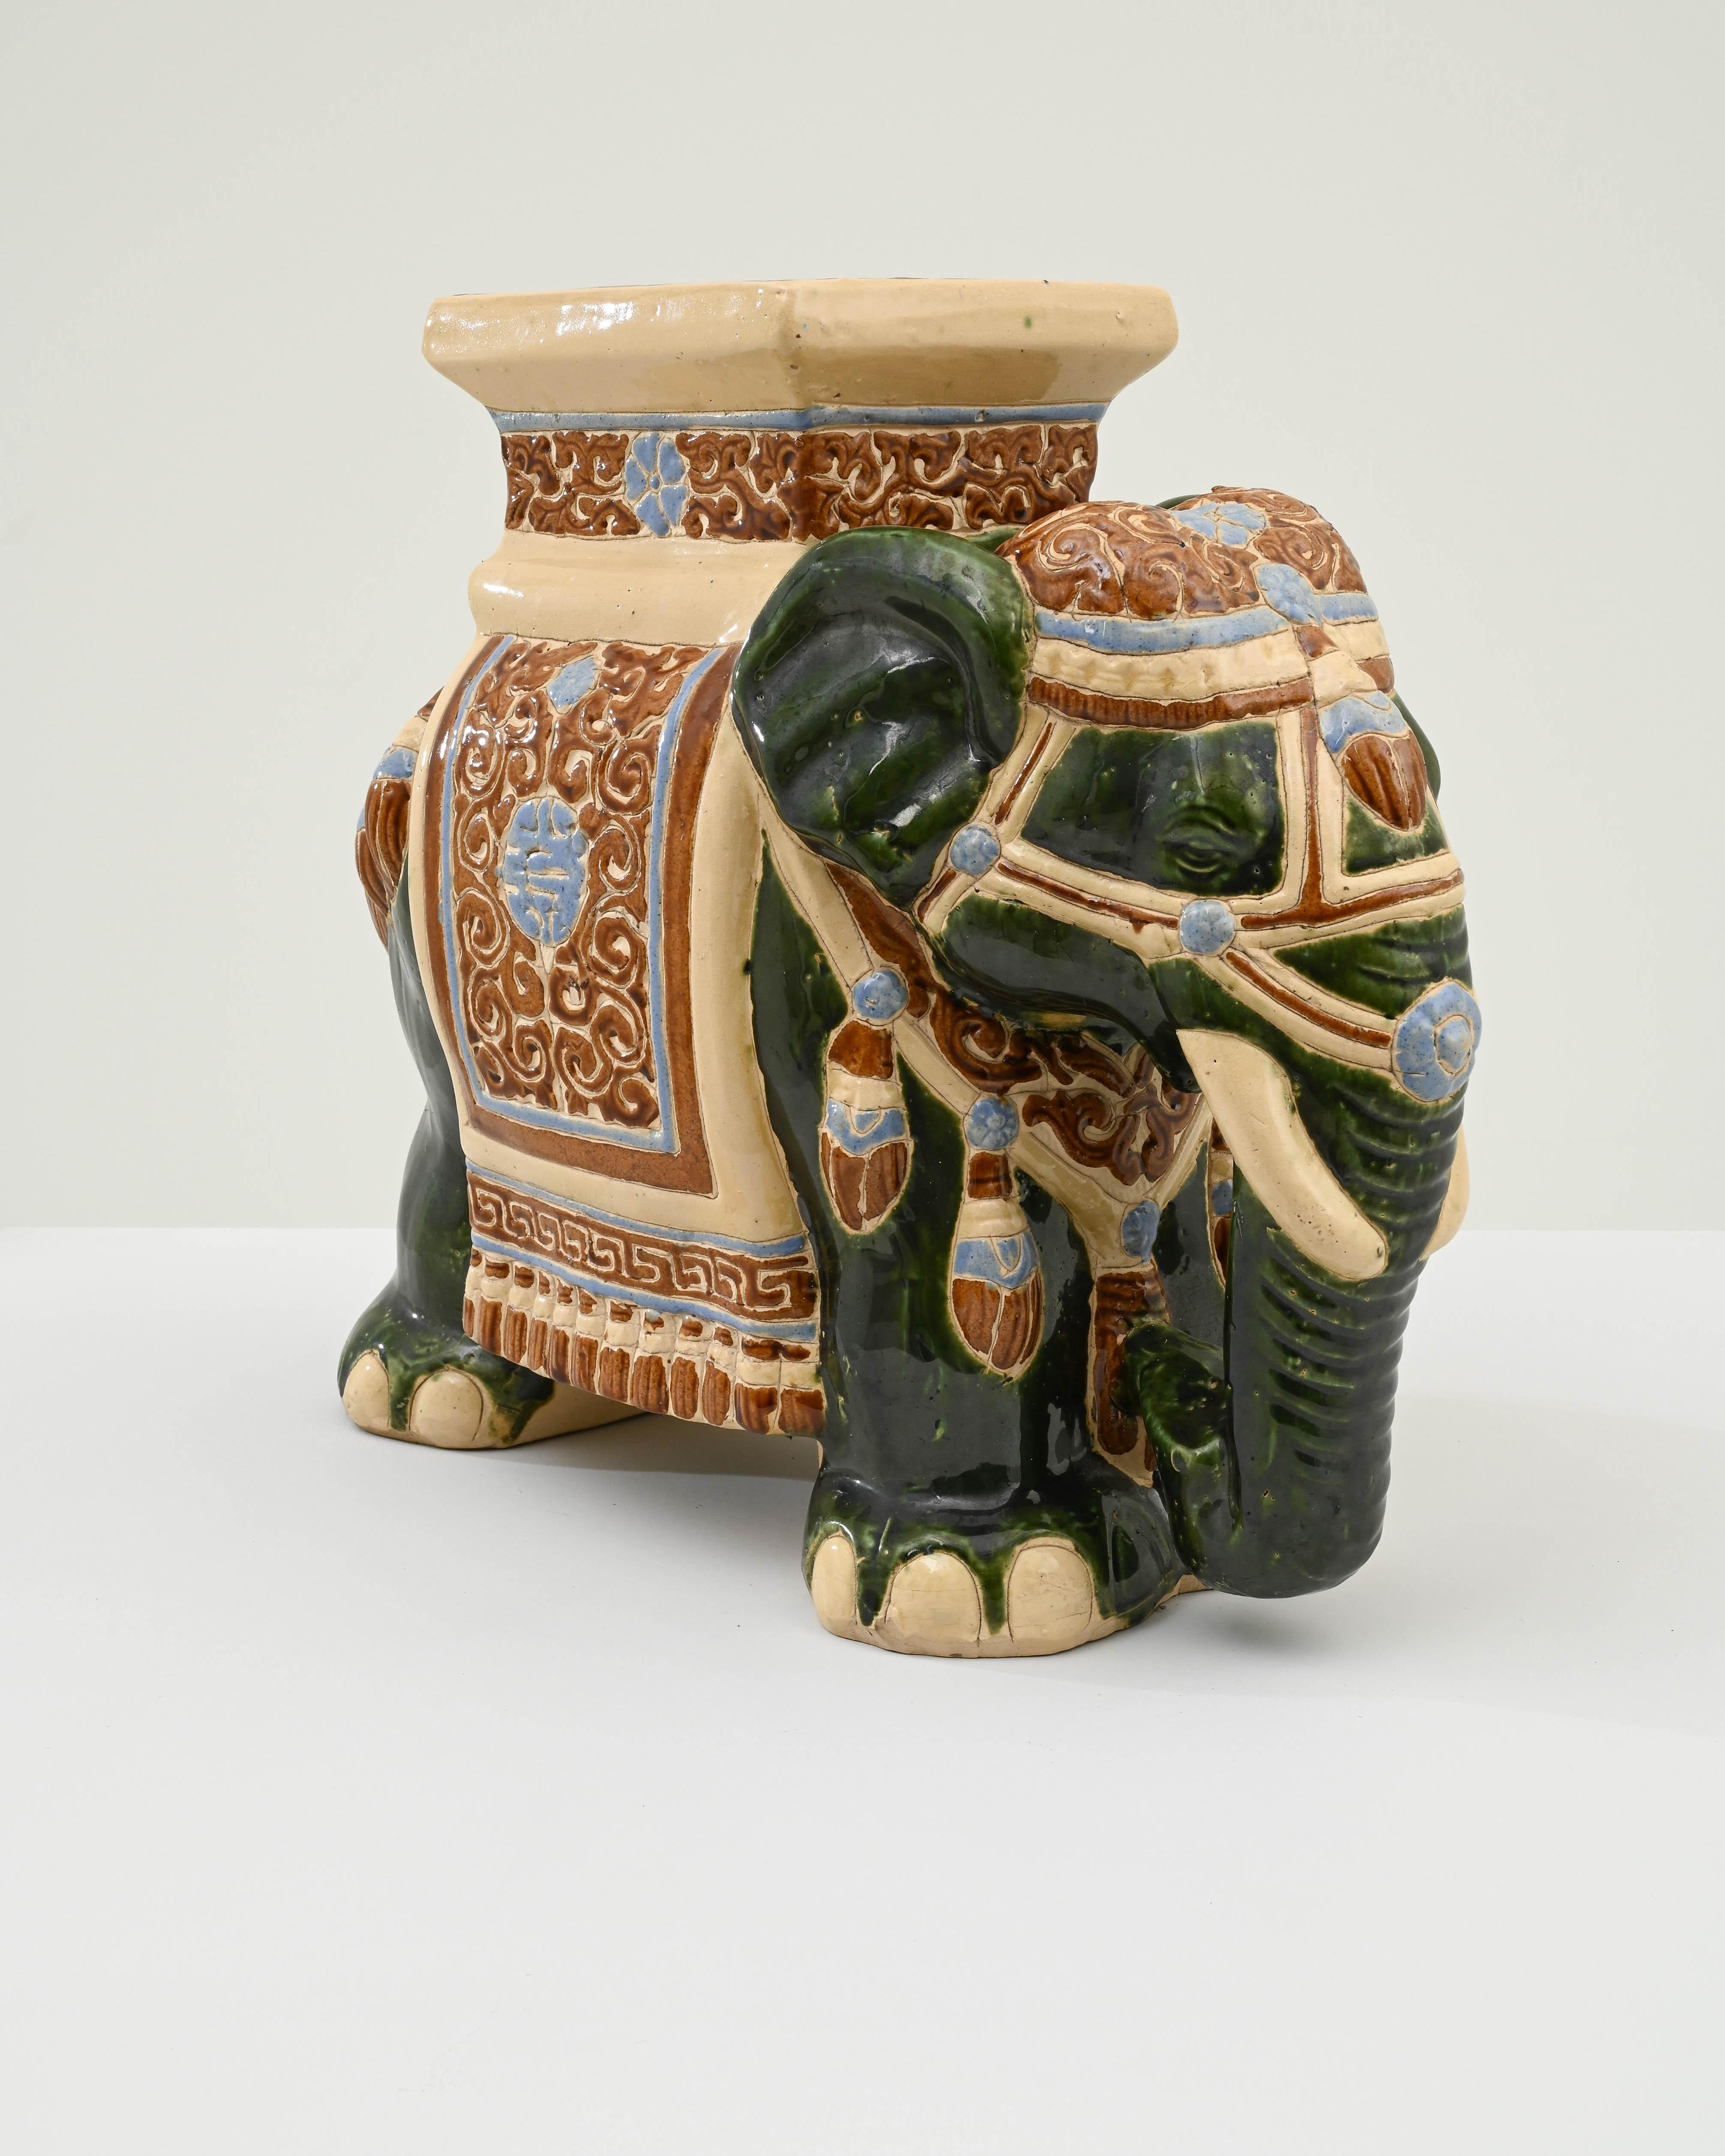 A ceramic decoration from 1960s France in the shape of an elephant. A saddle seat and blanket are glazed with pale blue and ochre, the elephant’s skin painted with dark celadon and laced with lines of the earth tone clay body; the assortment of